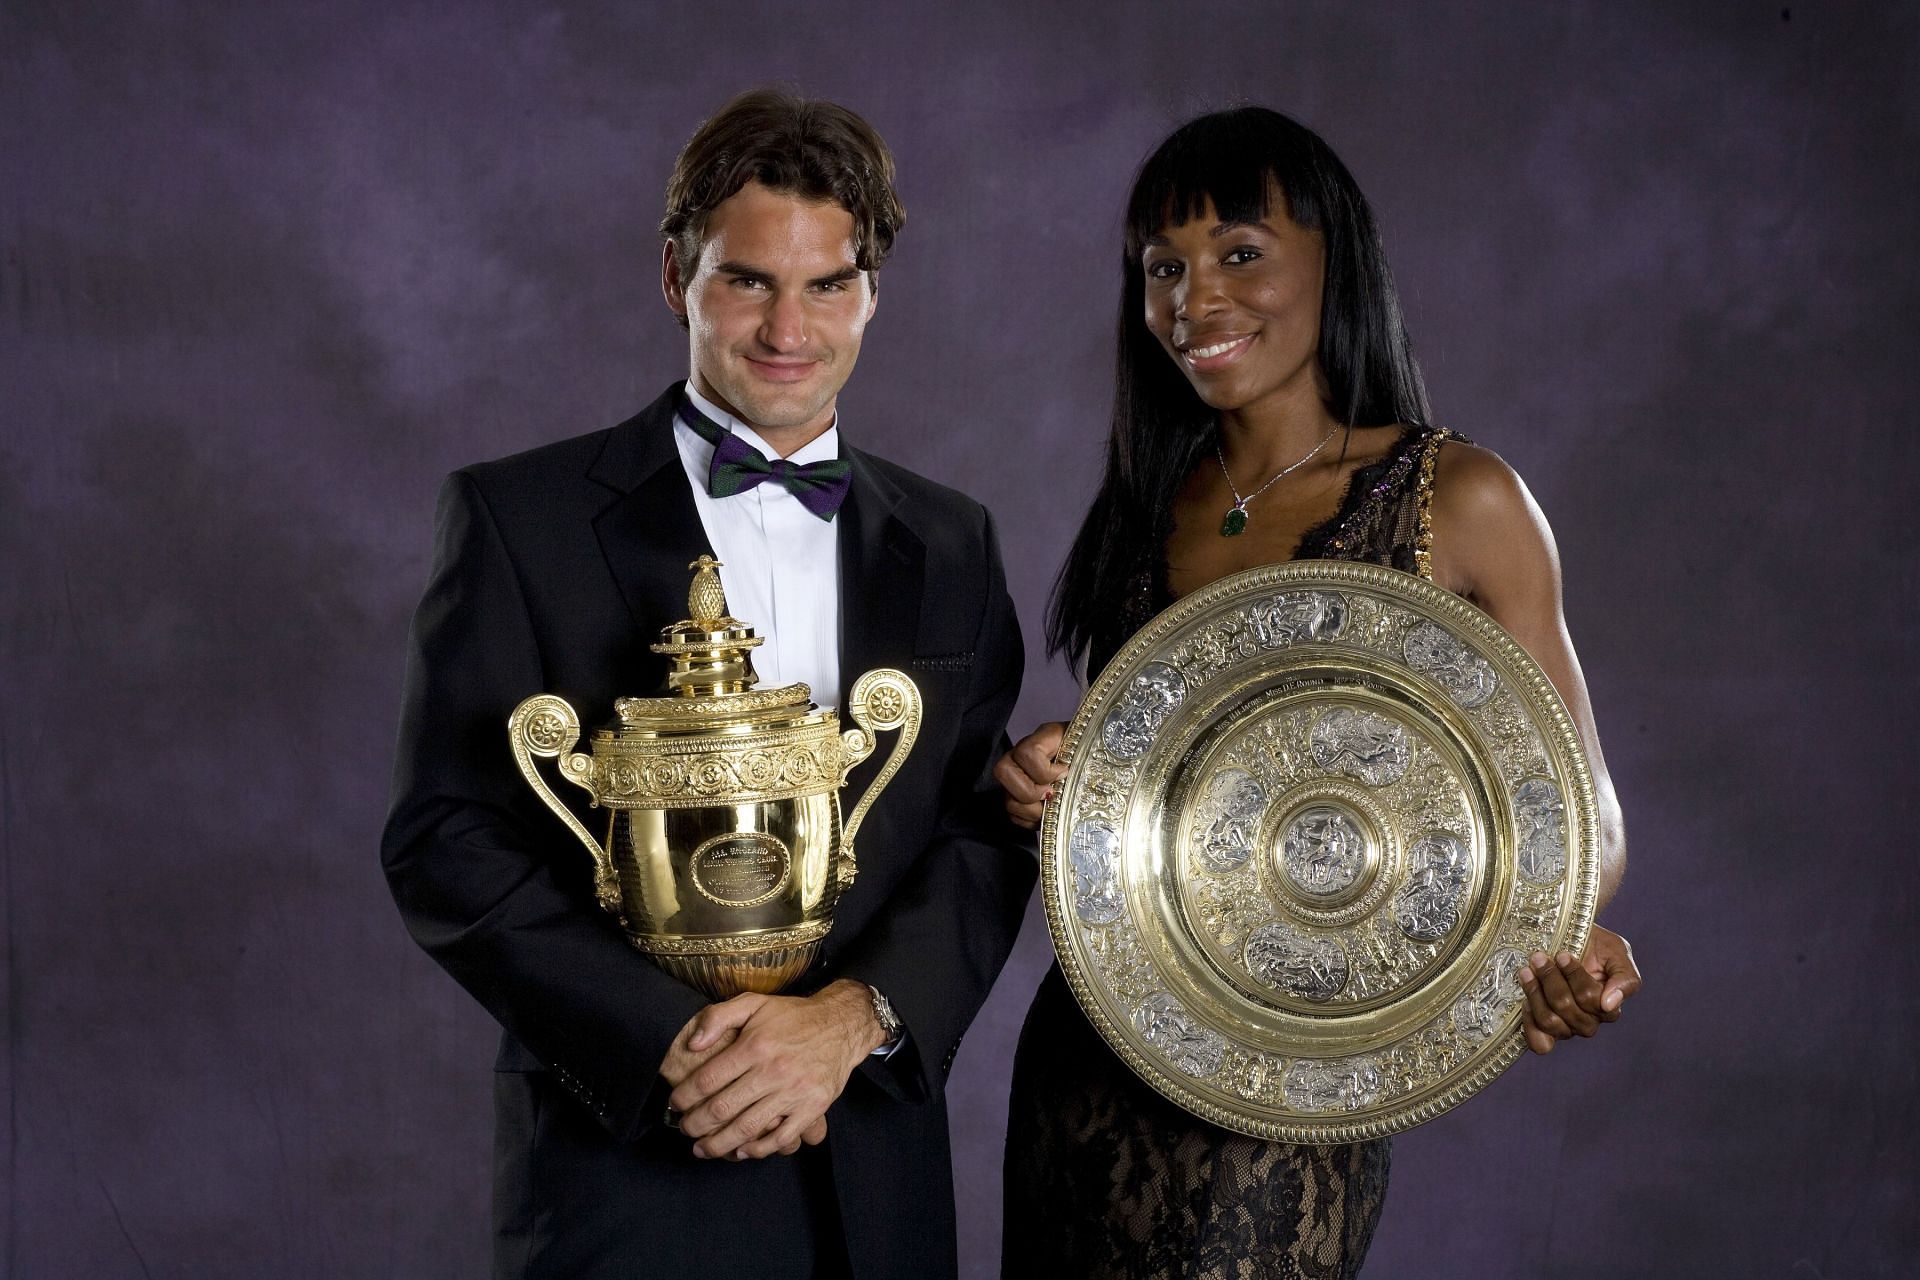 Roger Federer and Venus Williams with their respective 2007 Wimbledon titles.